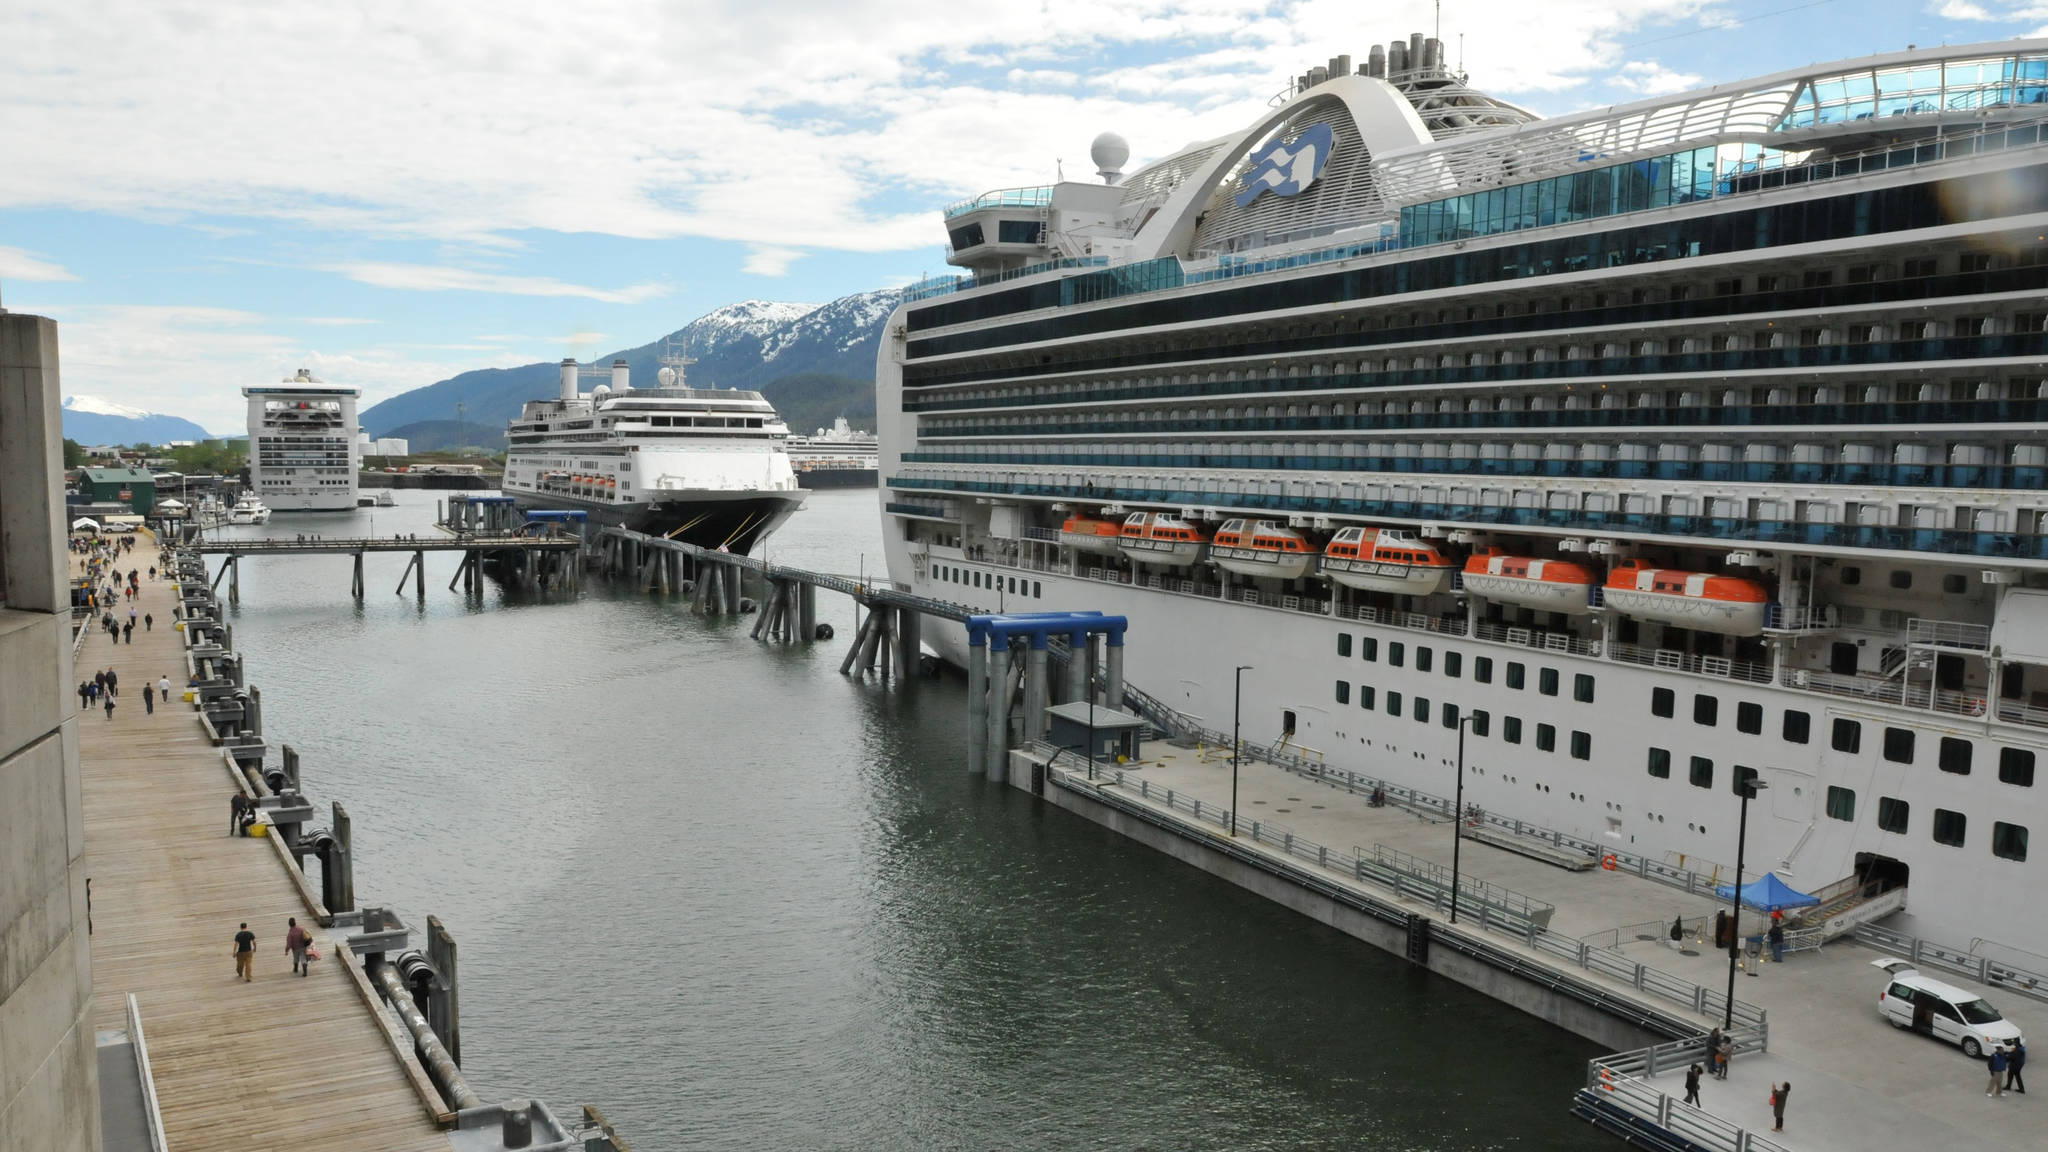 The Juneau Cruise Ship Berth project was completed in May 2017. The first cruise ships visited the new facility on May 5. (Courtesy photo)